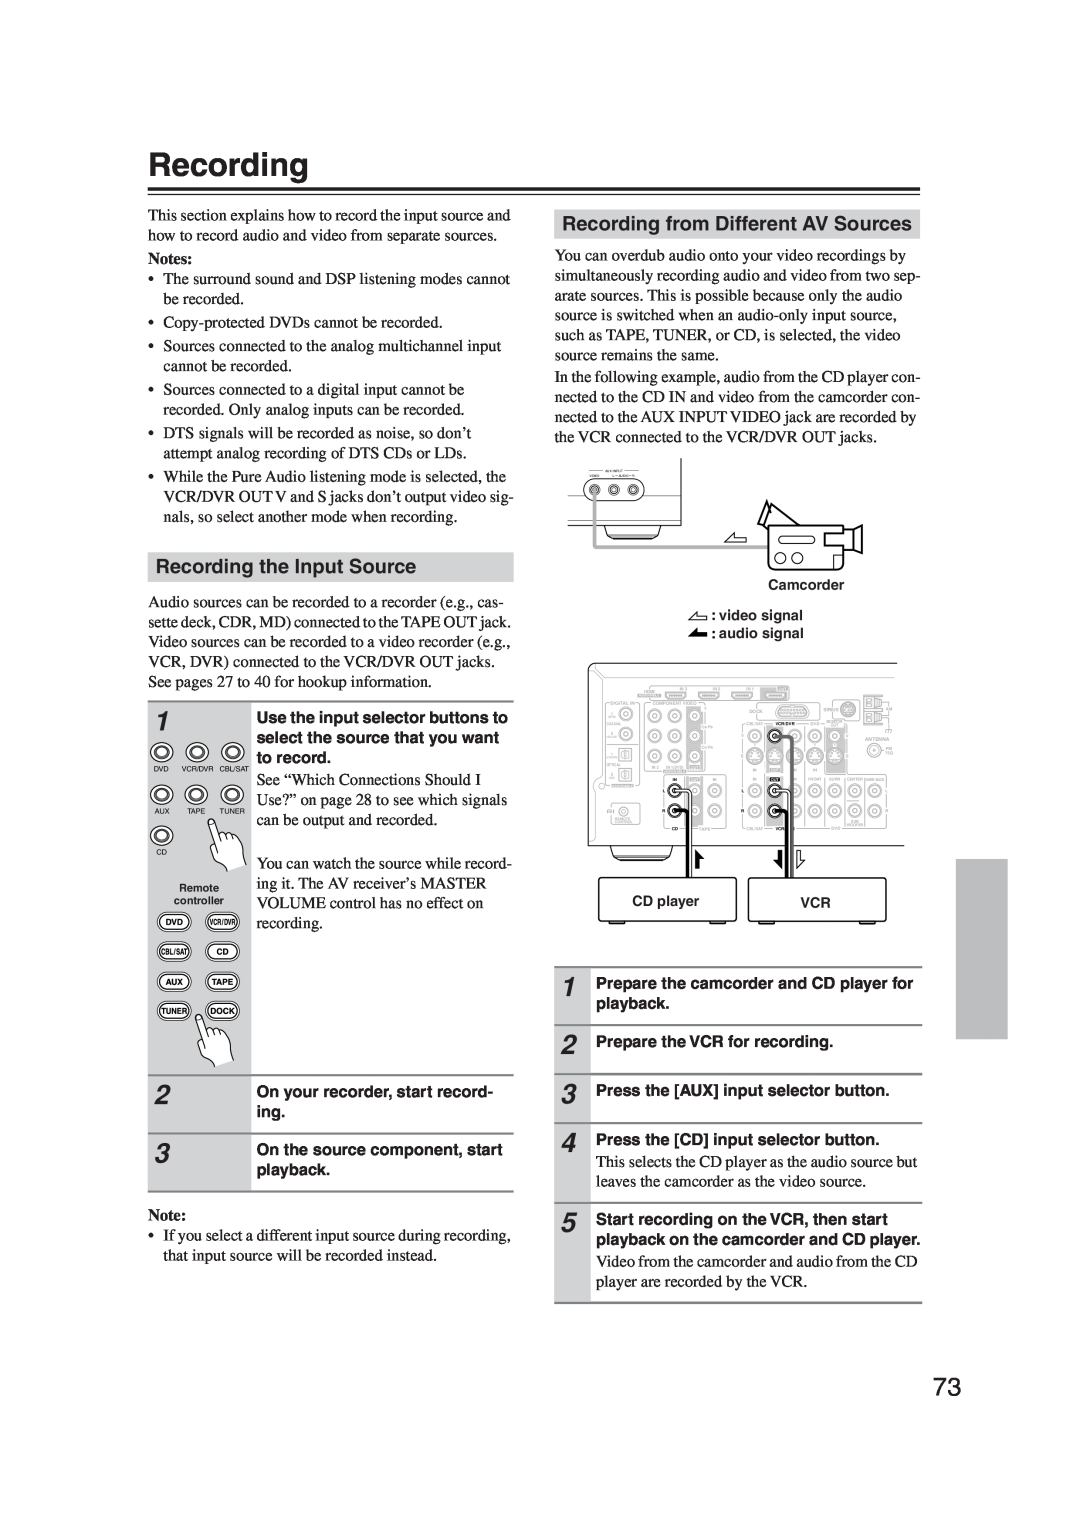 Onkyo S5100 instruction manual Recording the Input Source, Recording from Different AV Sources, Notes 